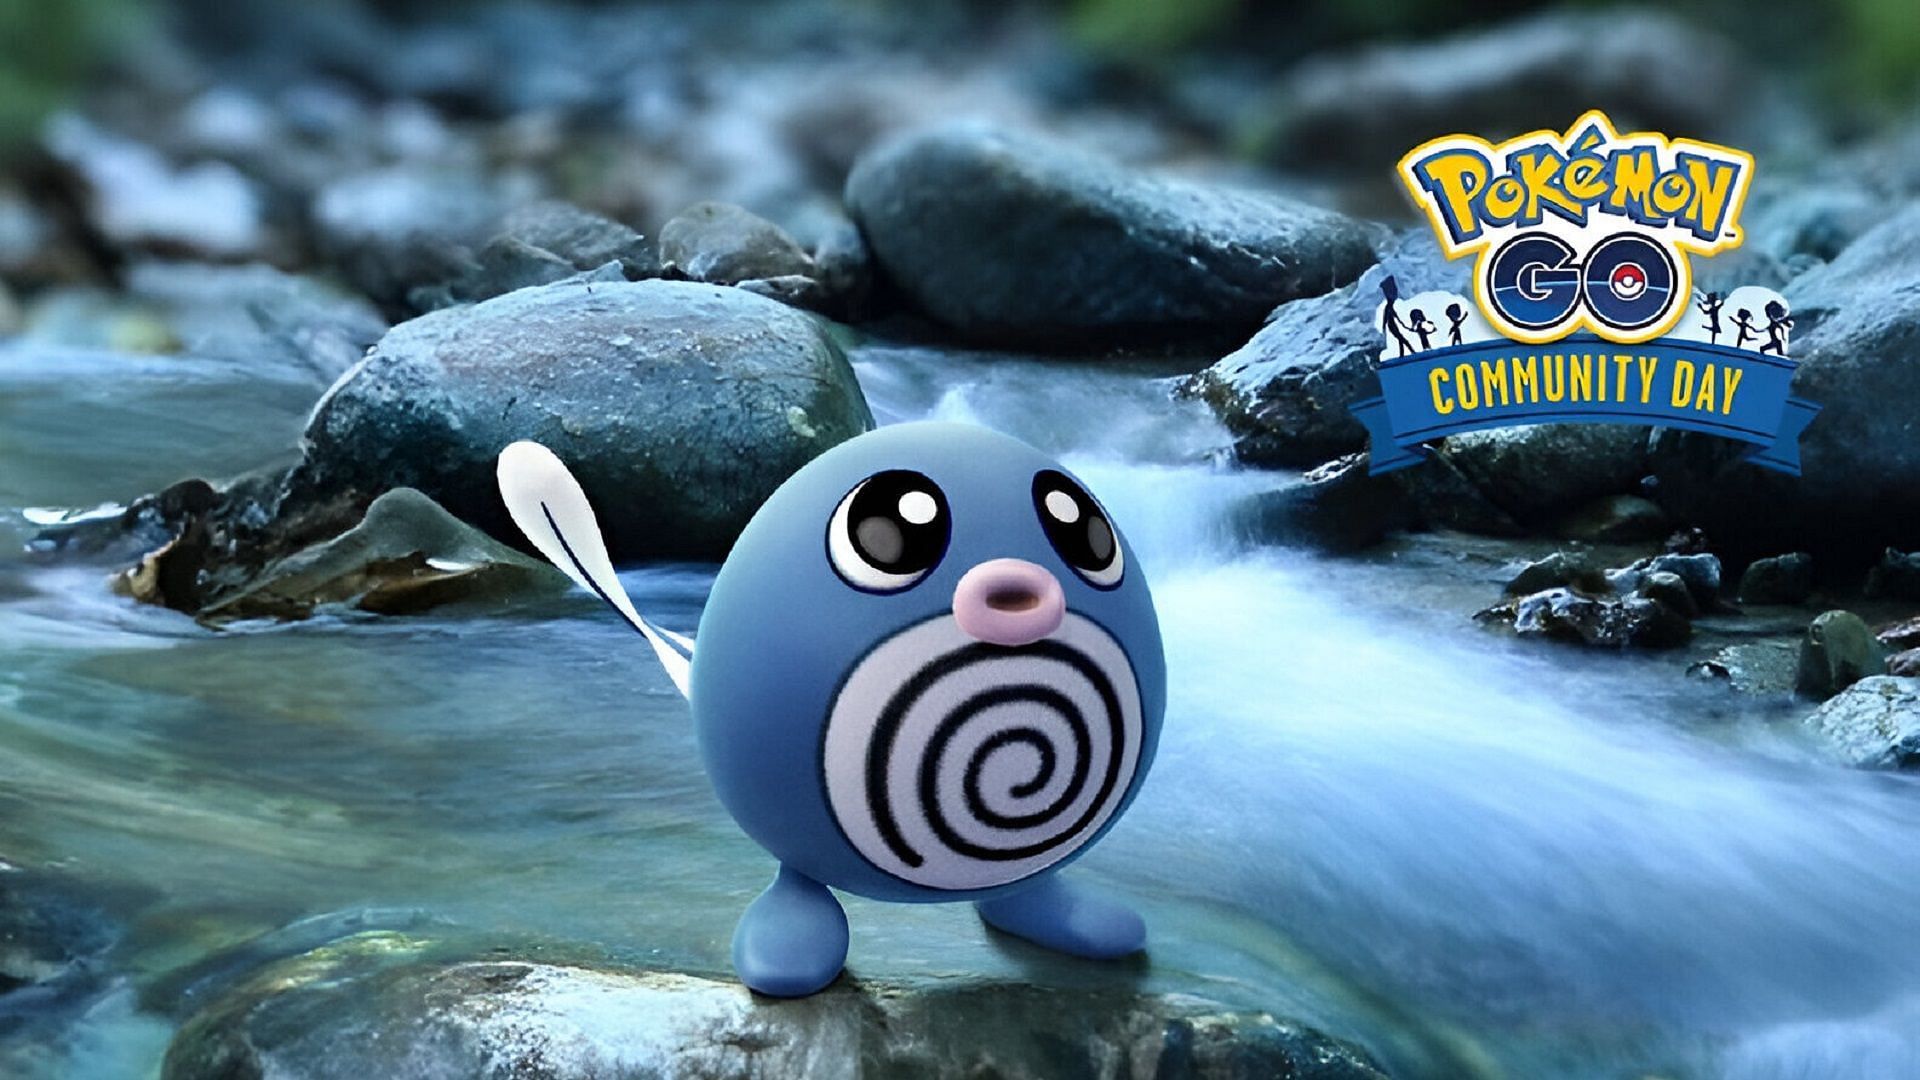 Poliwag can evolve into Poliwrath, a powerful Pokemon GO PvP contender (Image via Niantic)